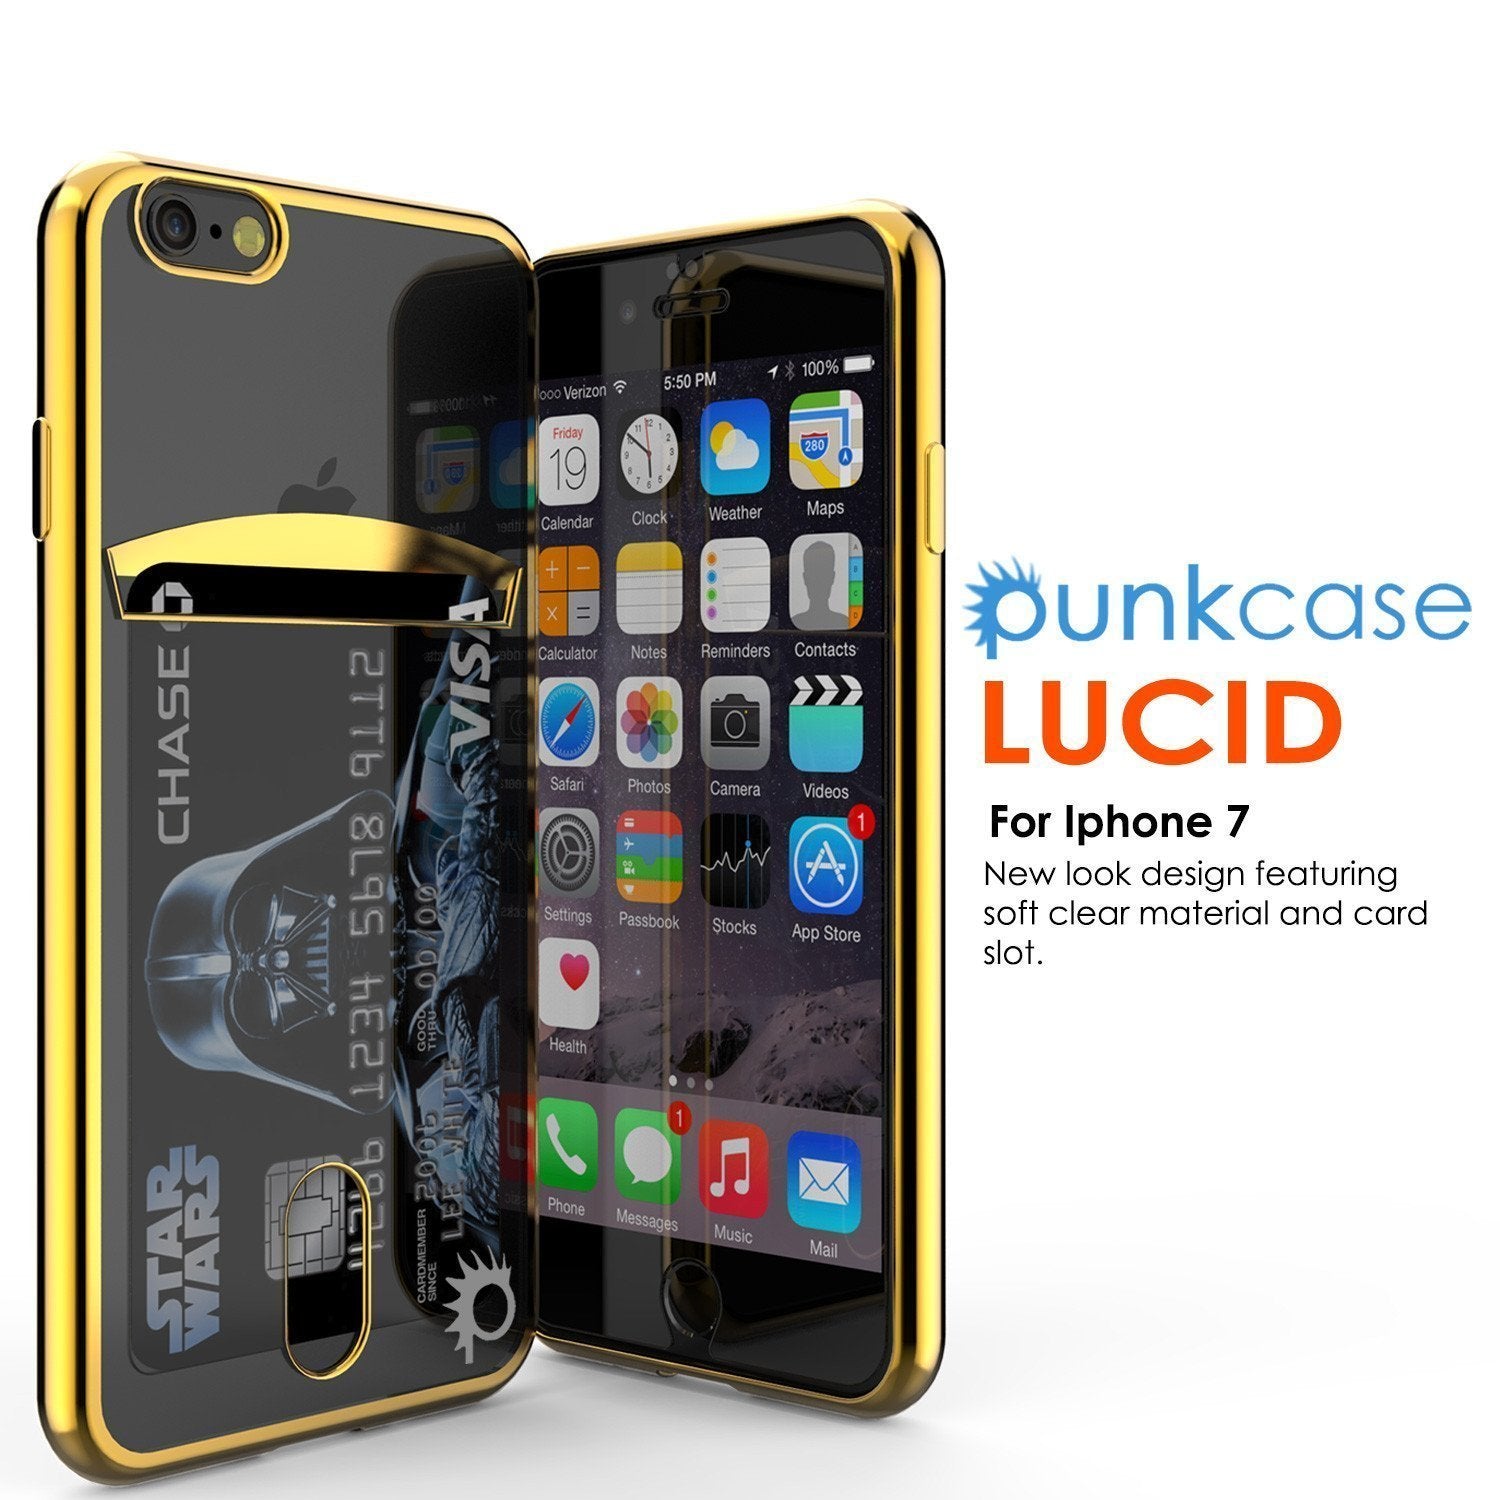 iPhone SE (4.7") Case, PUNKCASE® LUCID Gold Series | Card Slot | SHIELD Screen Protector | Ultra fit